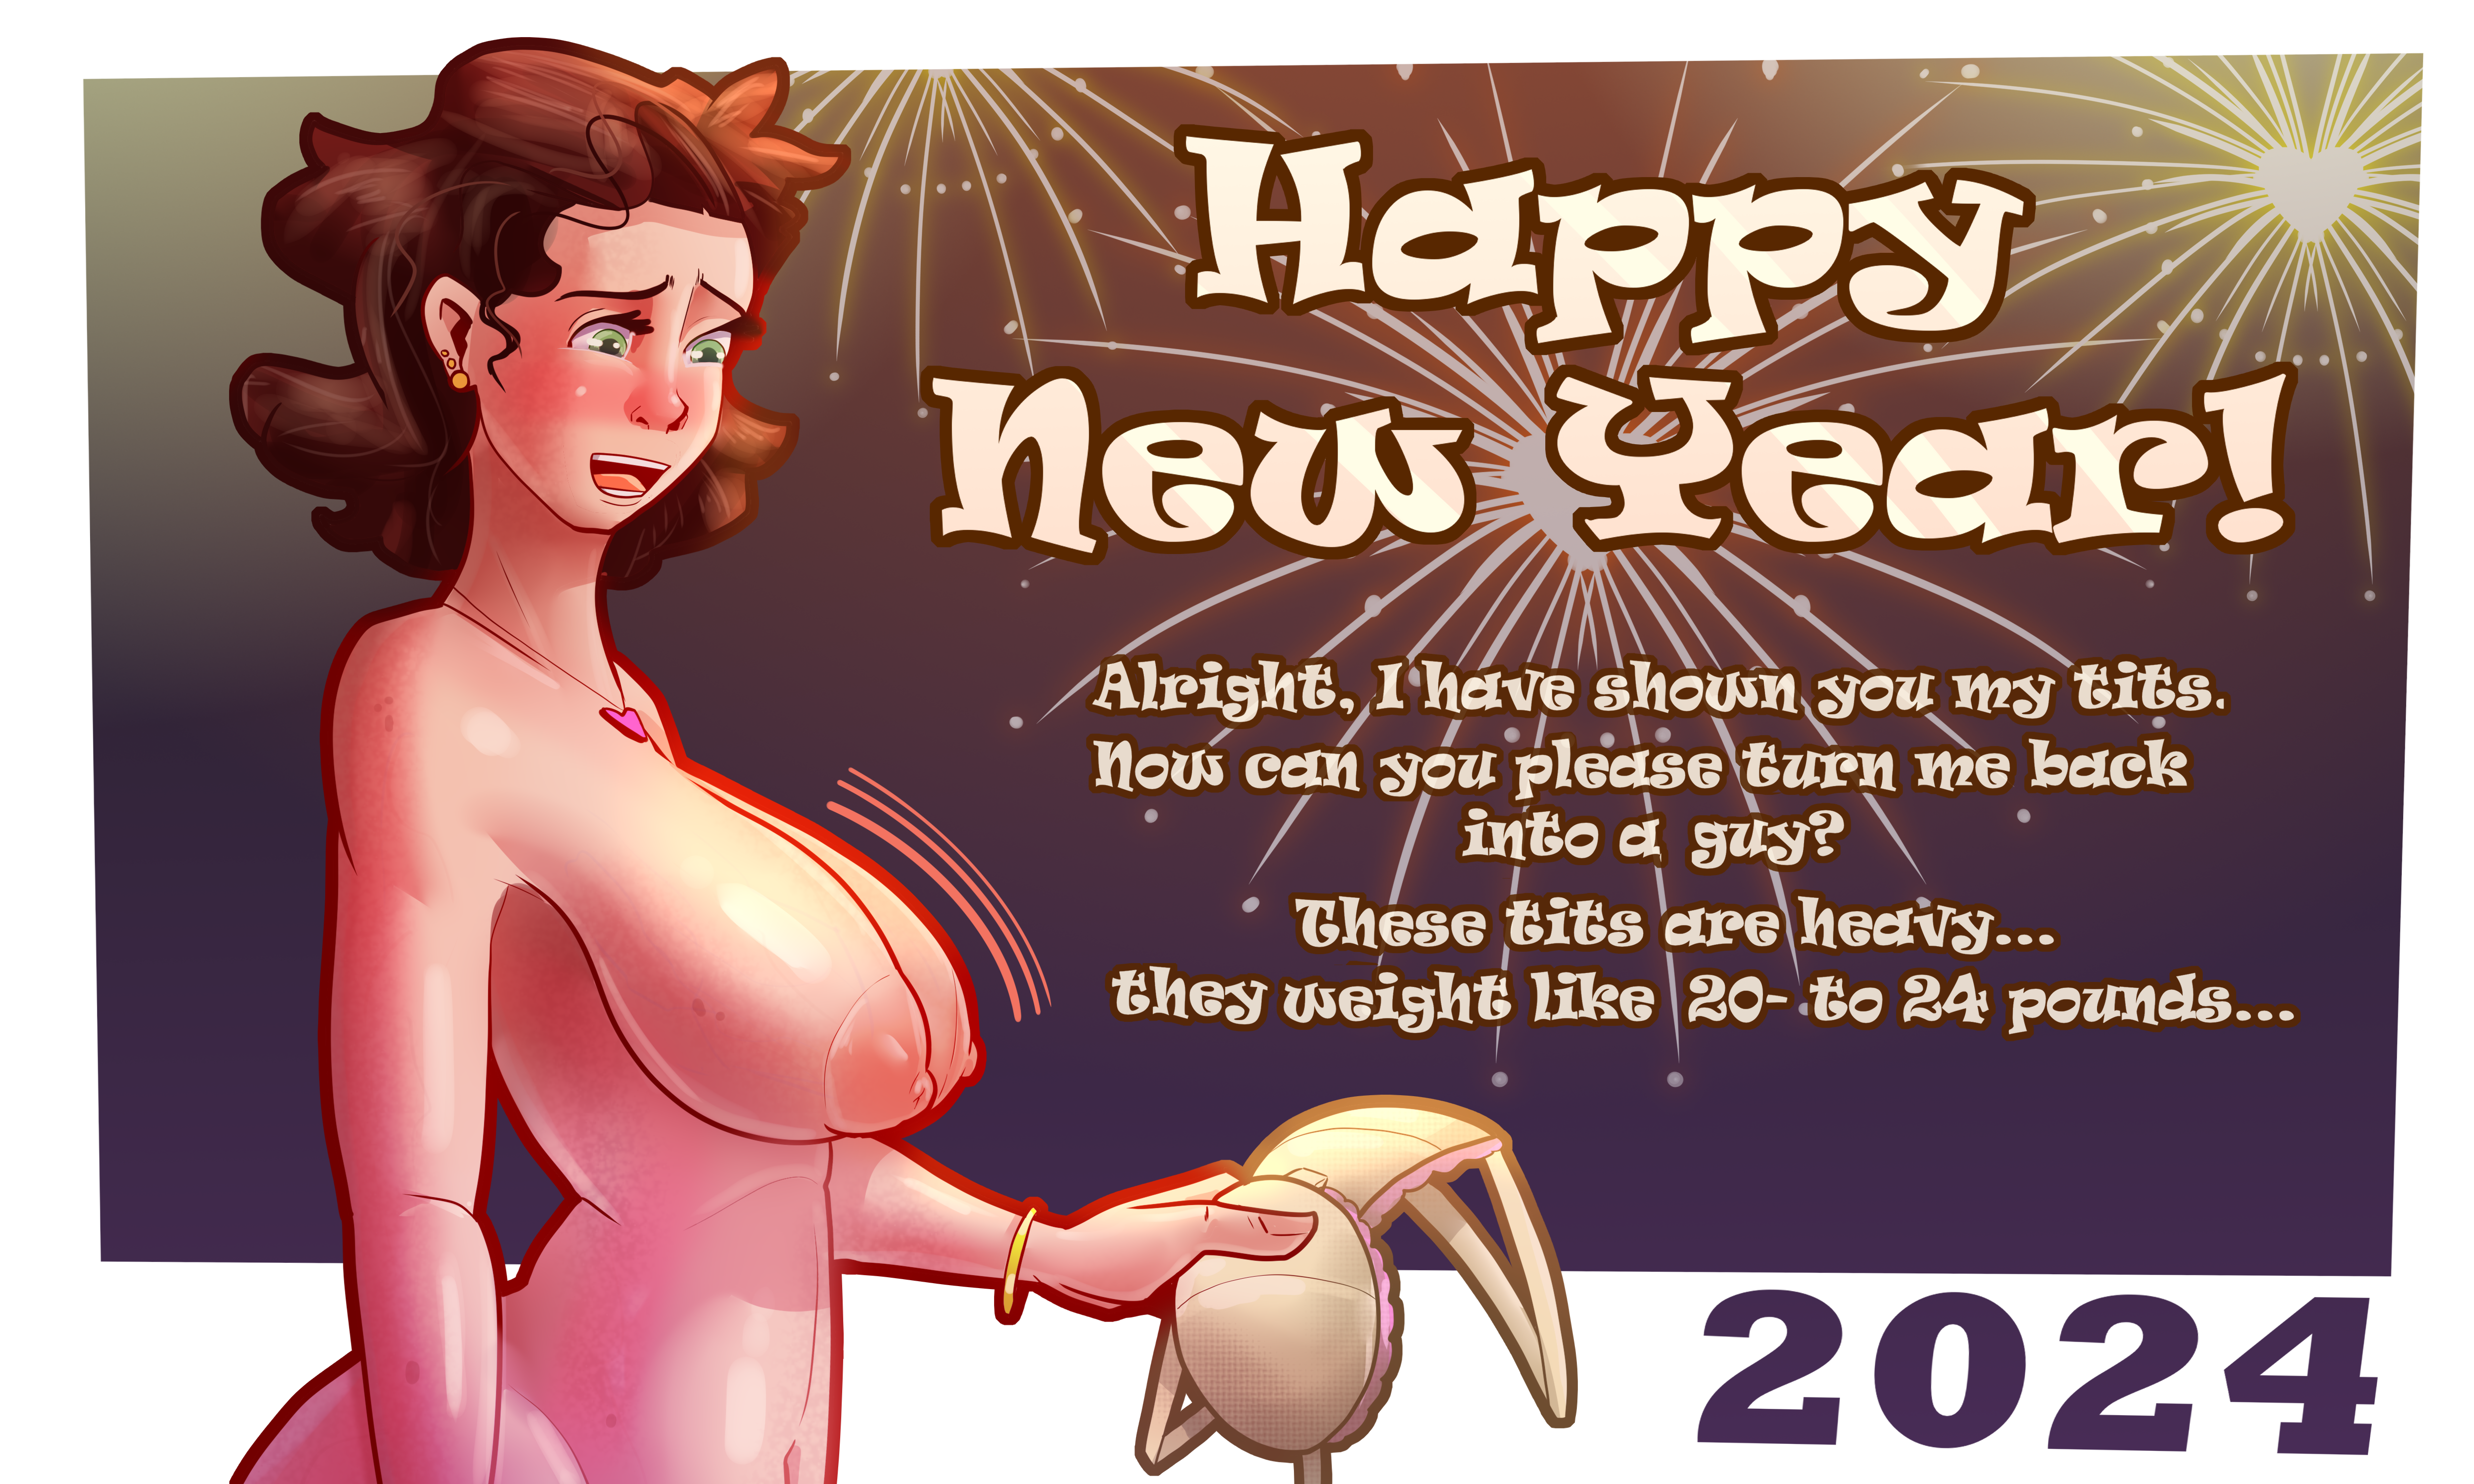 darcy hocker recommends happy new year tits pic